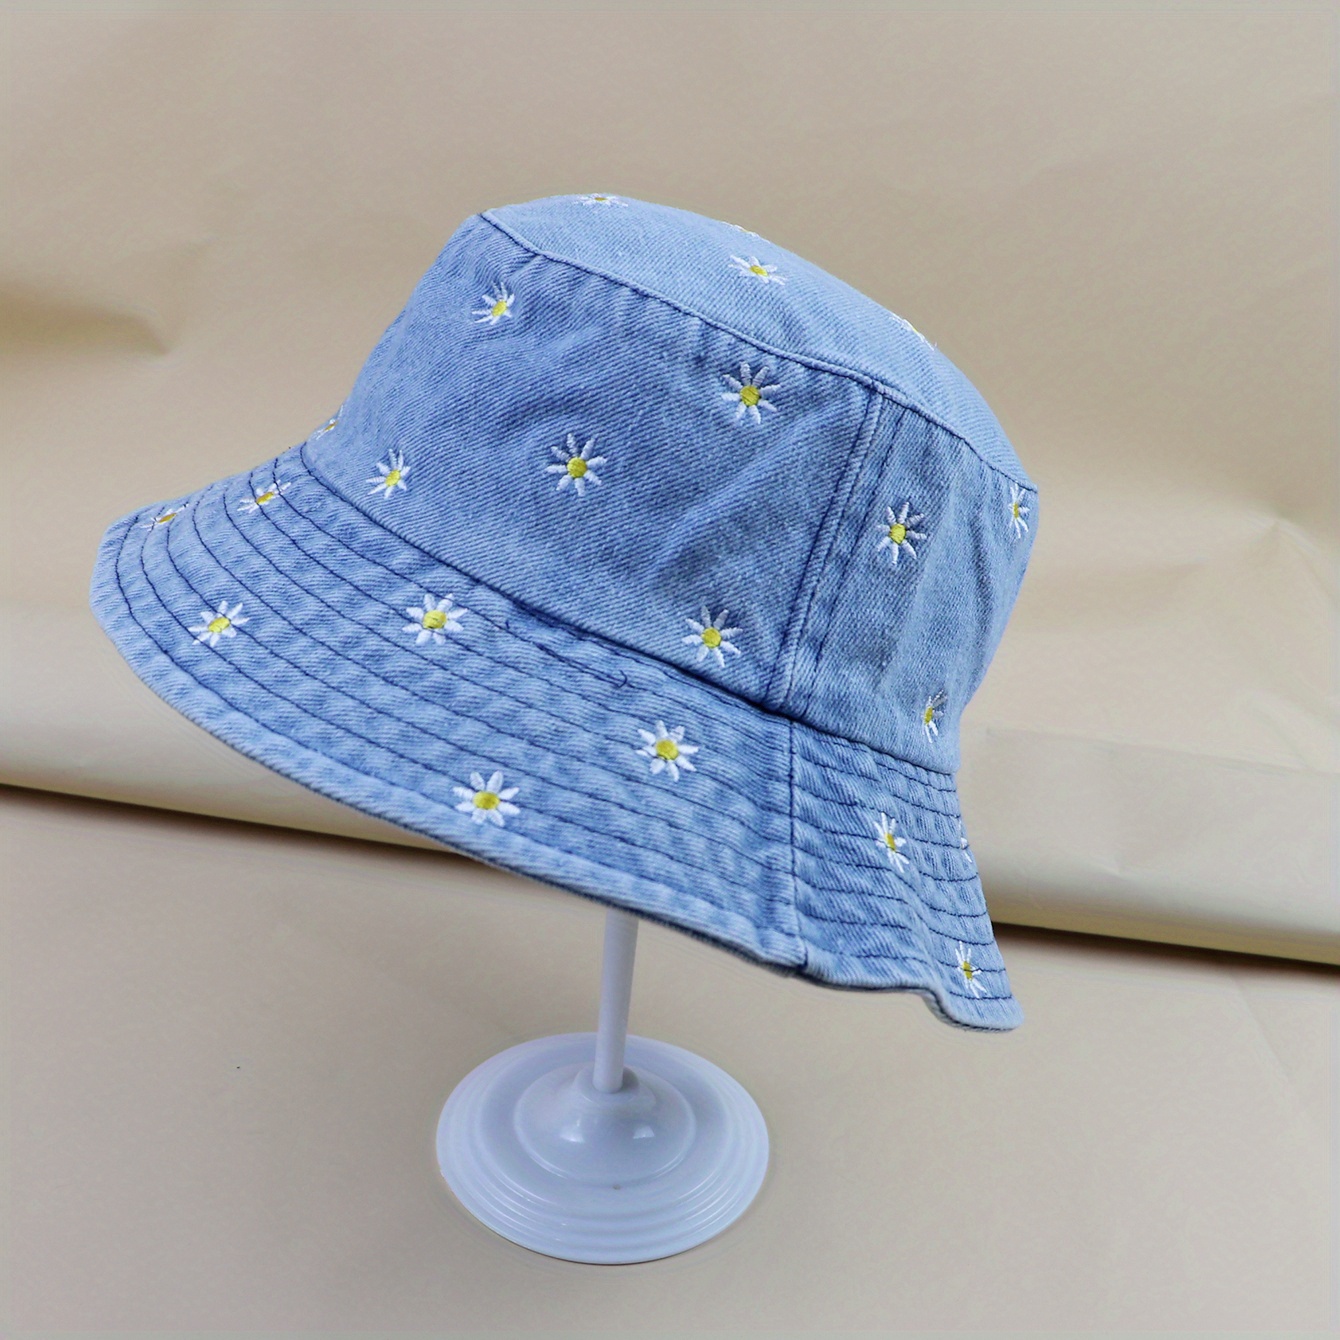 Classic Blue Denim Bucket Hat Trendy Washed Distressed Casual